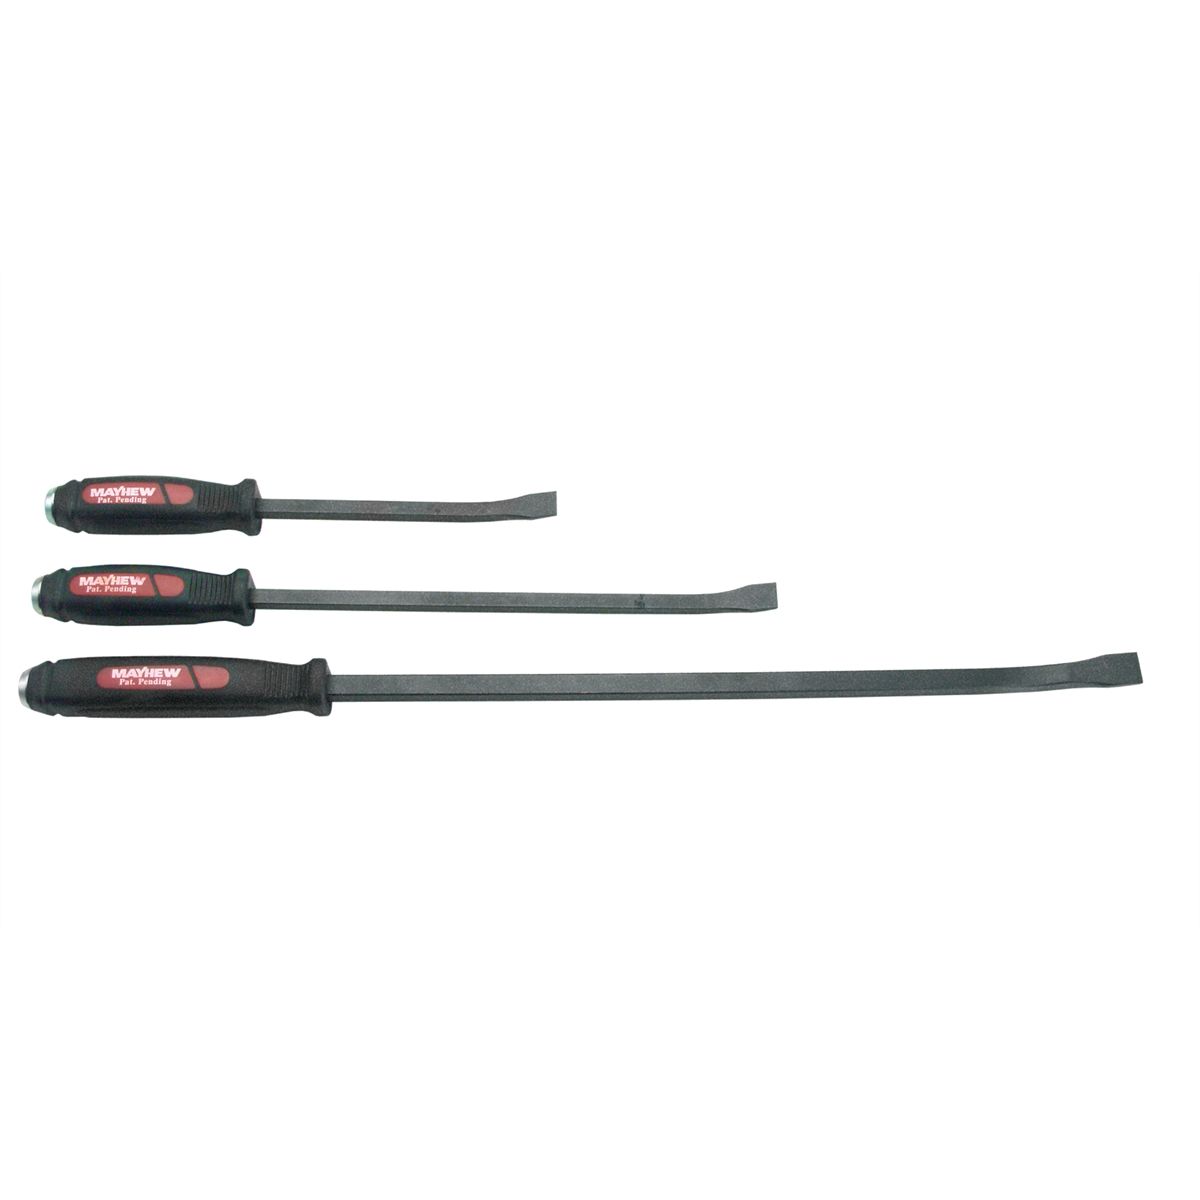 Mayhew Tools 61354 Pry Bar Set Straight Tip Dominator 3pc for sale online 